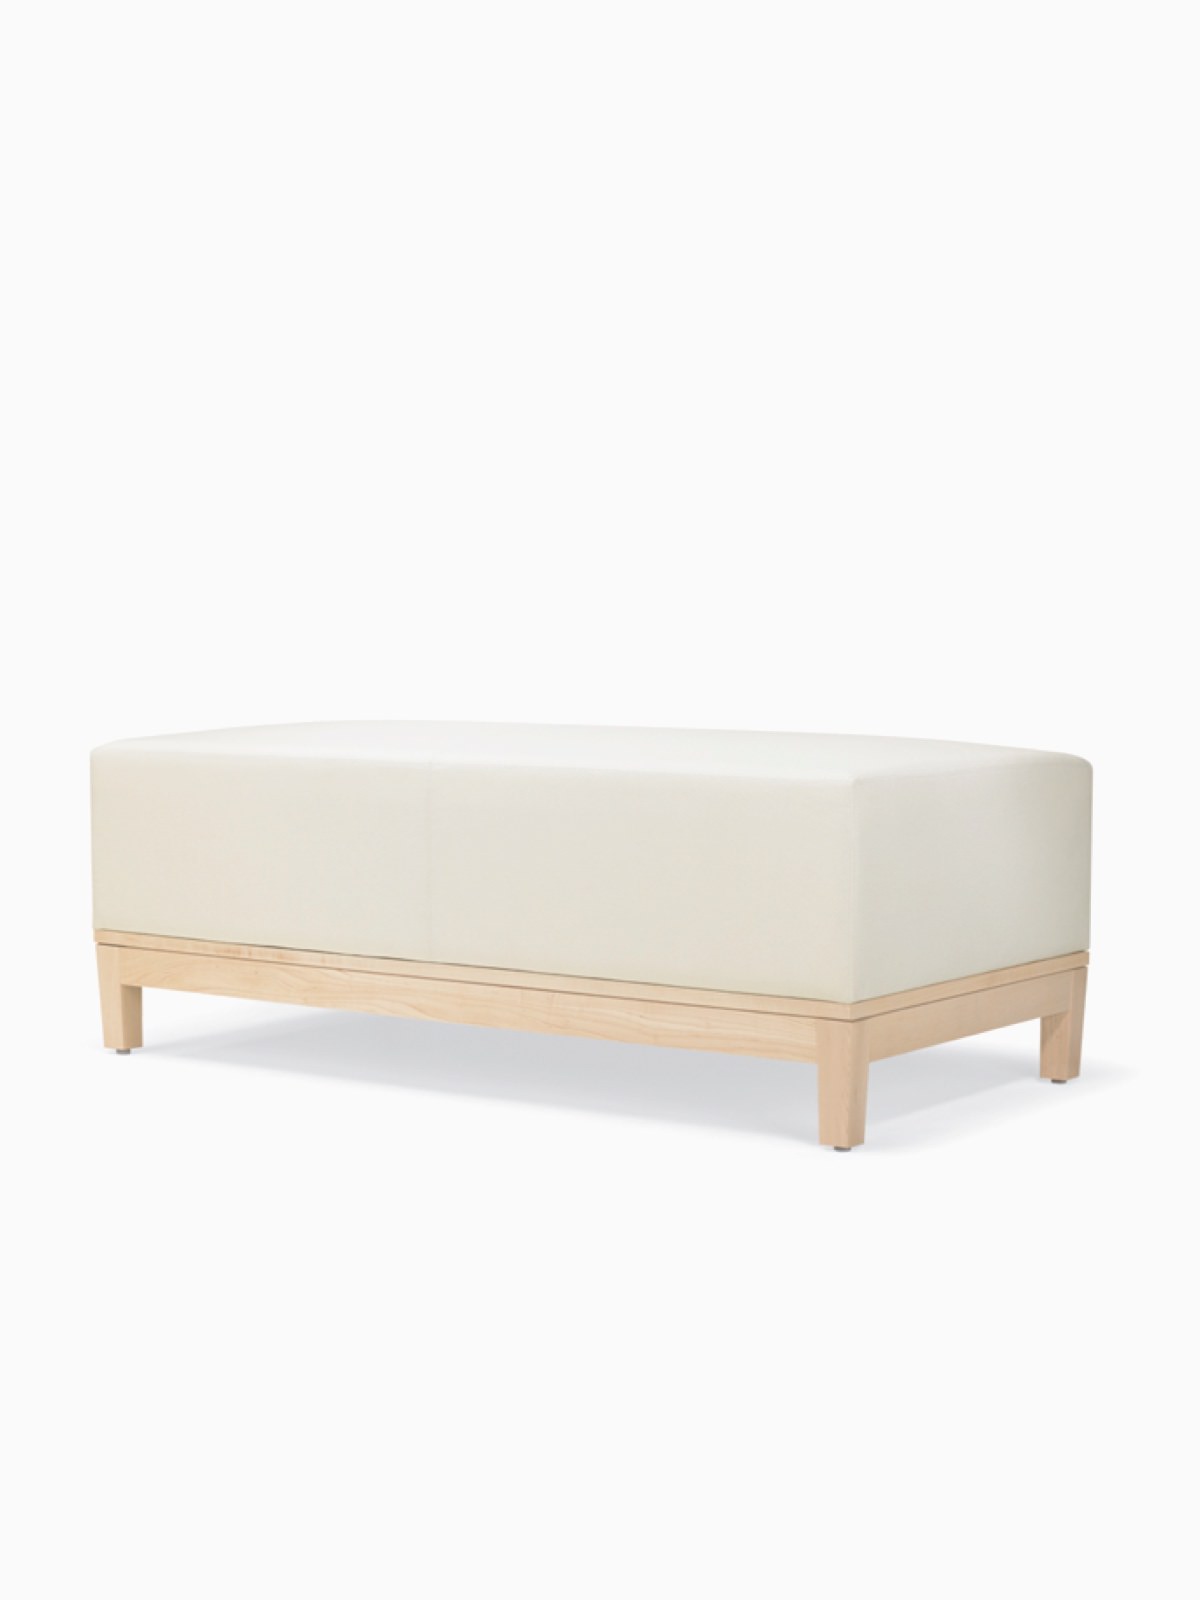 A three-quarter view of a Brava Platform Lounge Bench with maple base and white textile.